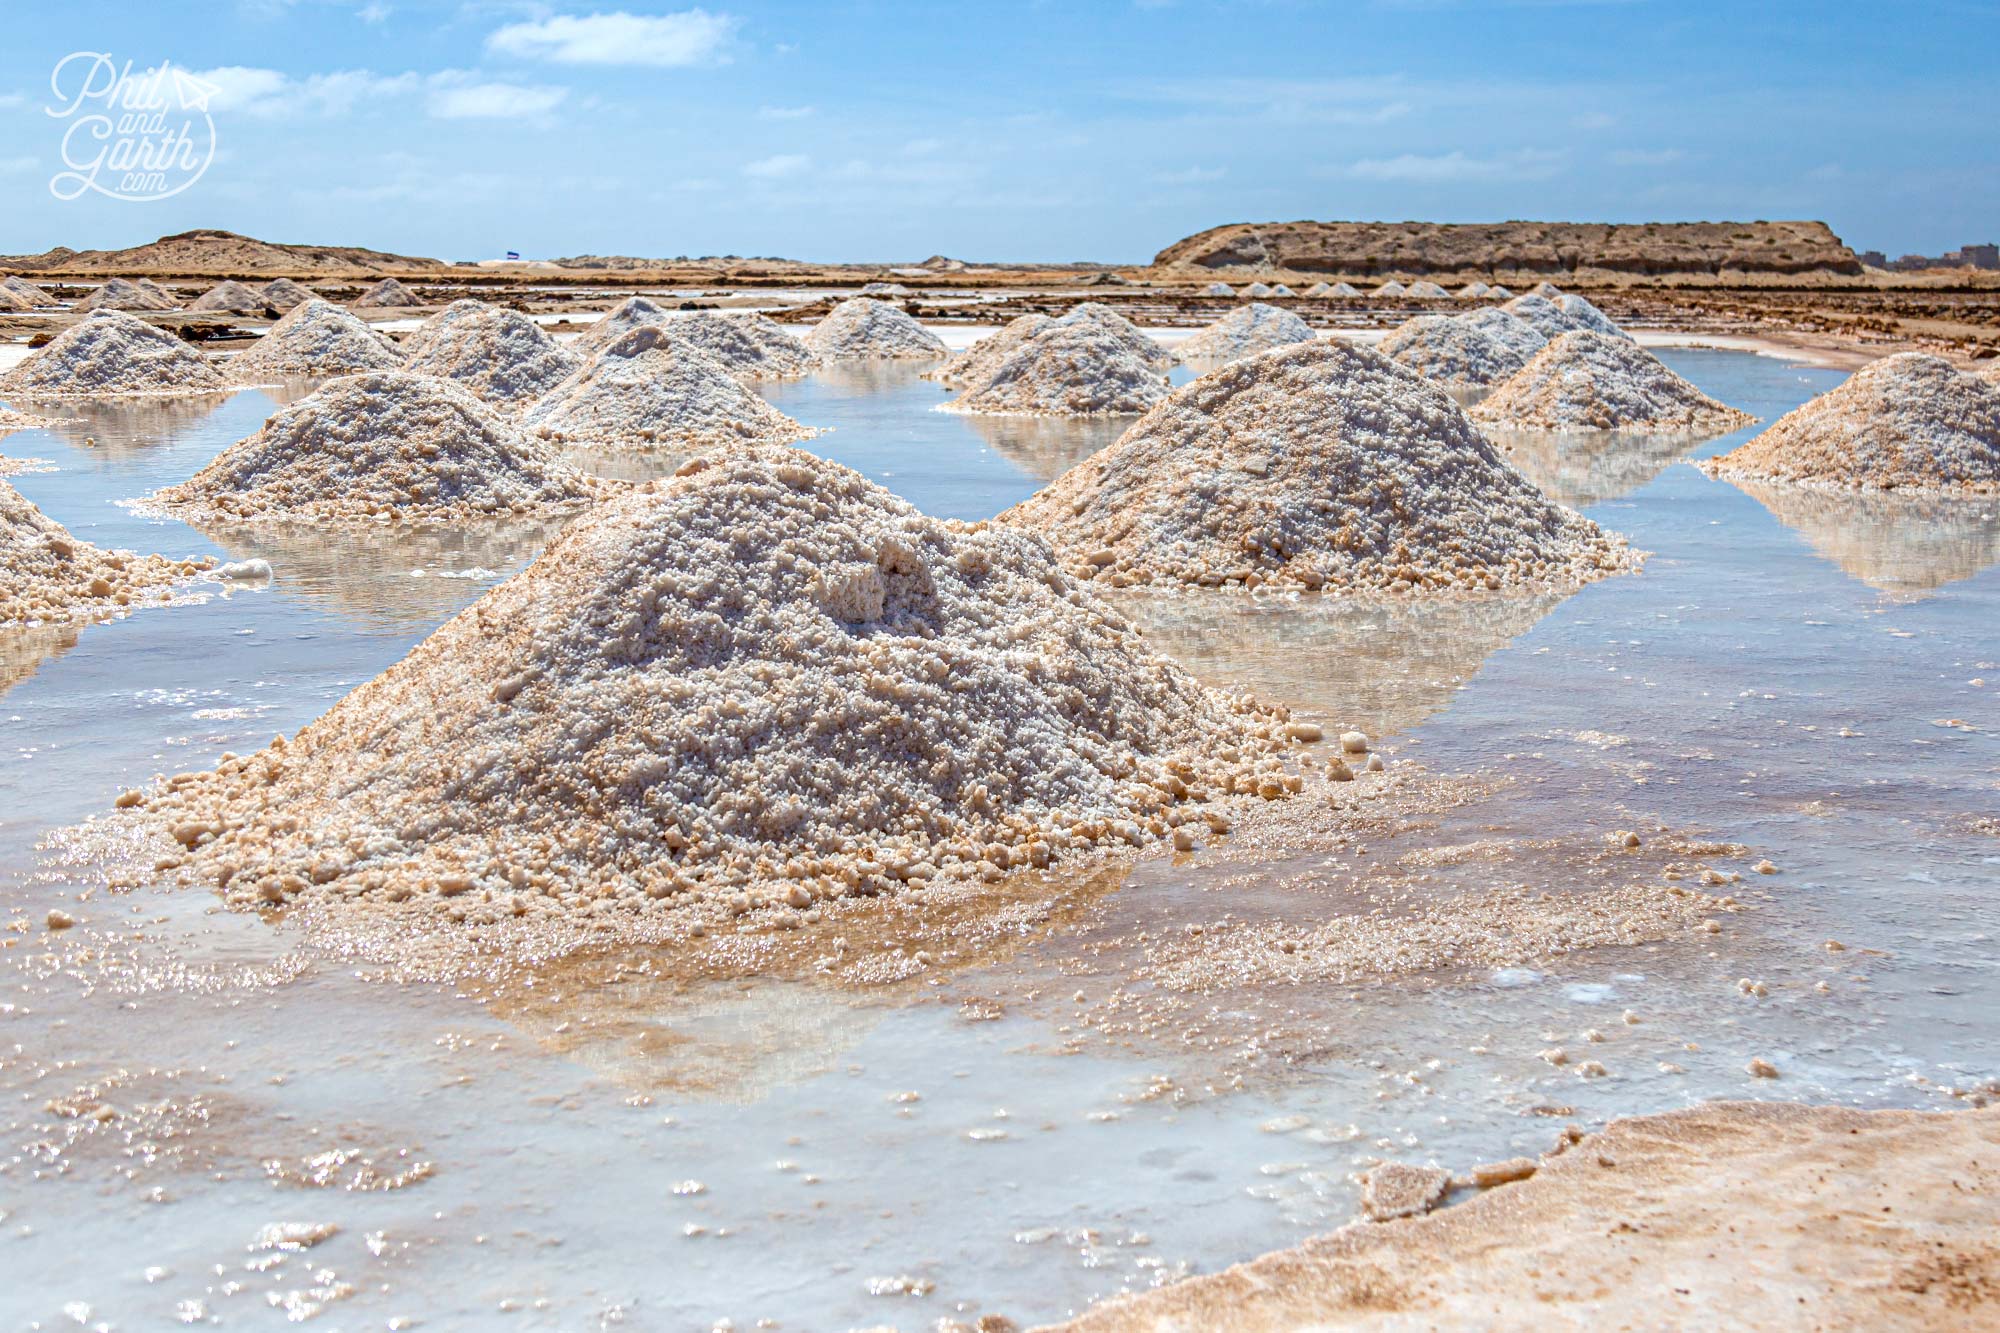 The island gets its name from the Portuguese word for salt